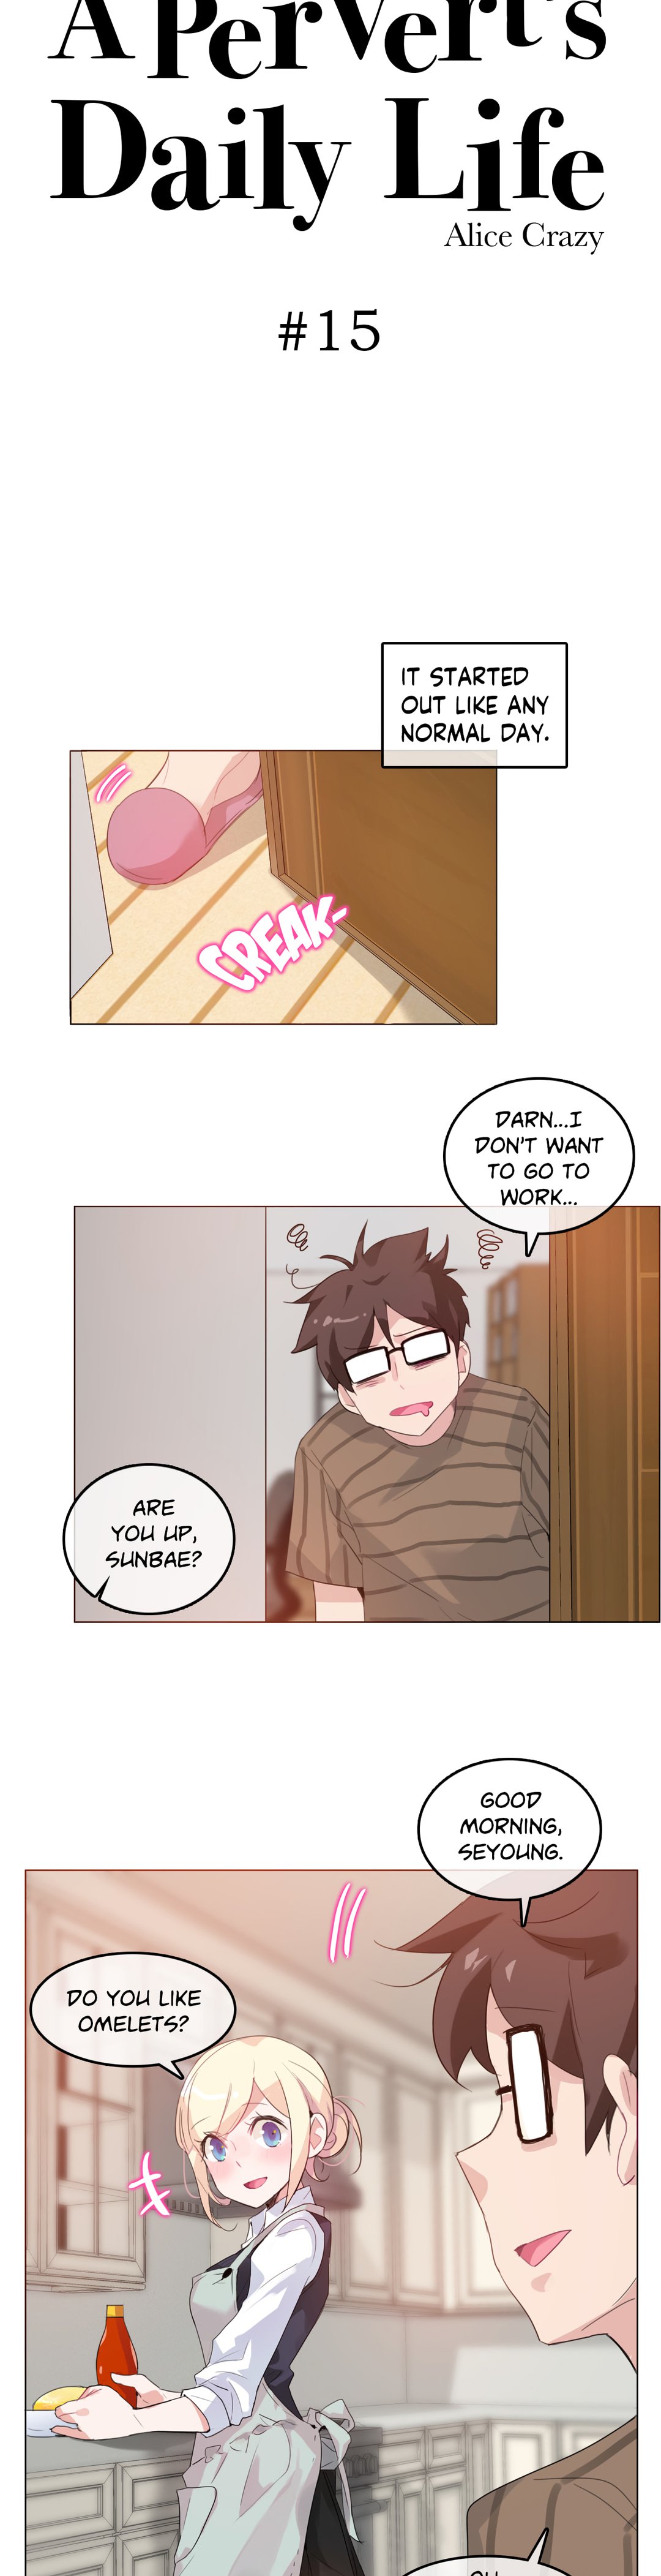 A Pervert's Daily Life - 15 page 5